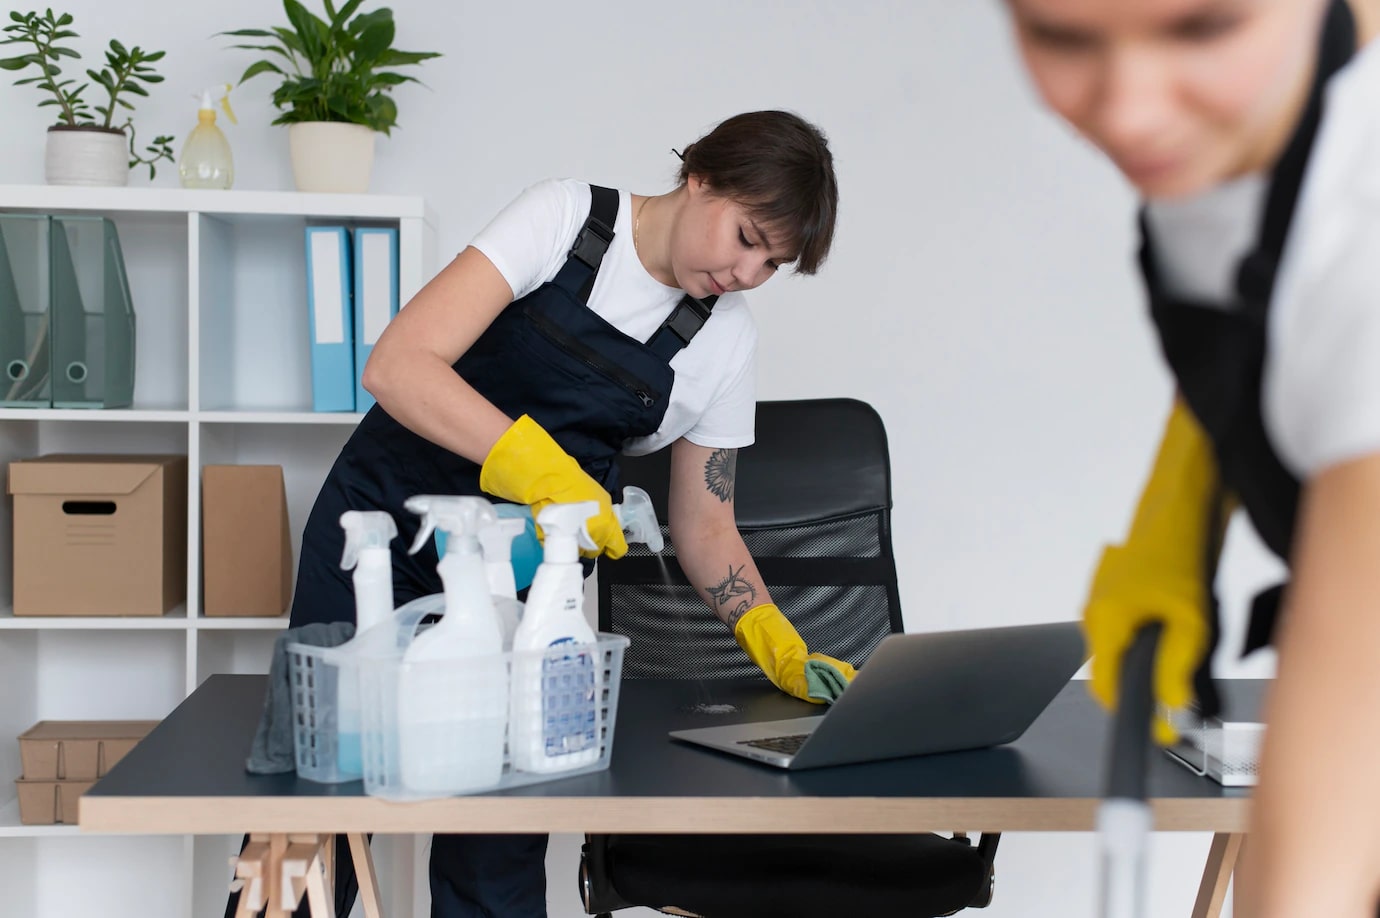 https://danburyct-housecleaningpros.com/wp-content/uploads/2022/10/people-taking-care-office-cleaning_23-2149374443.jpg